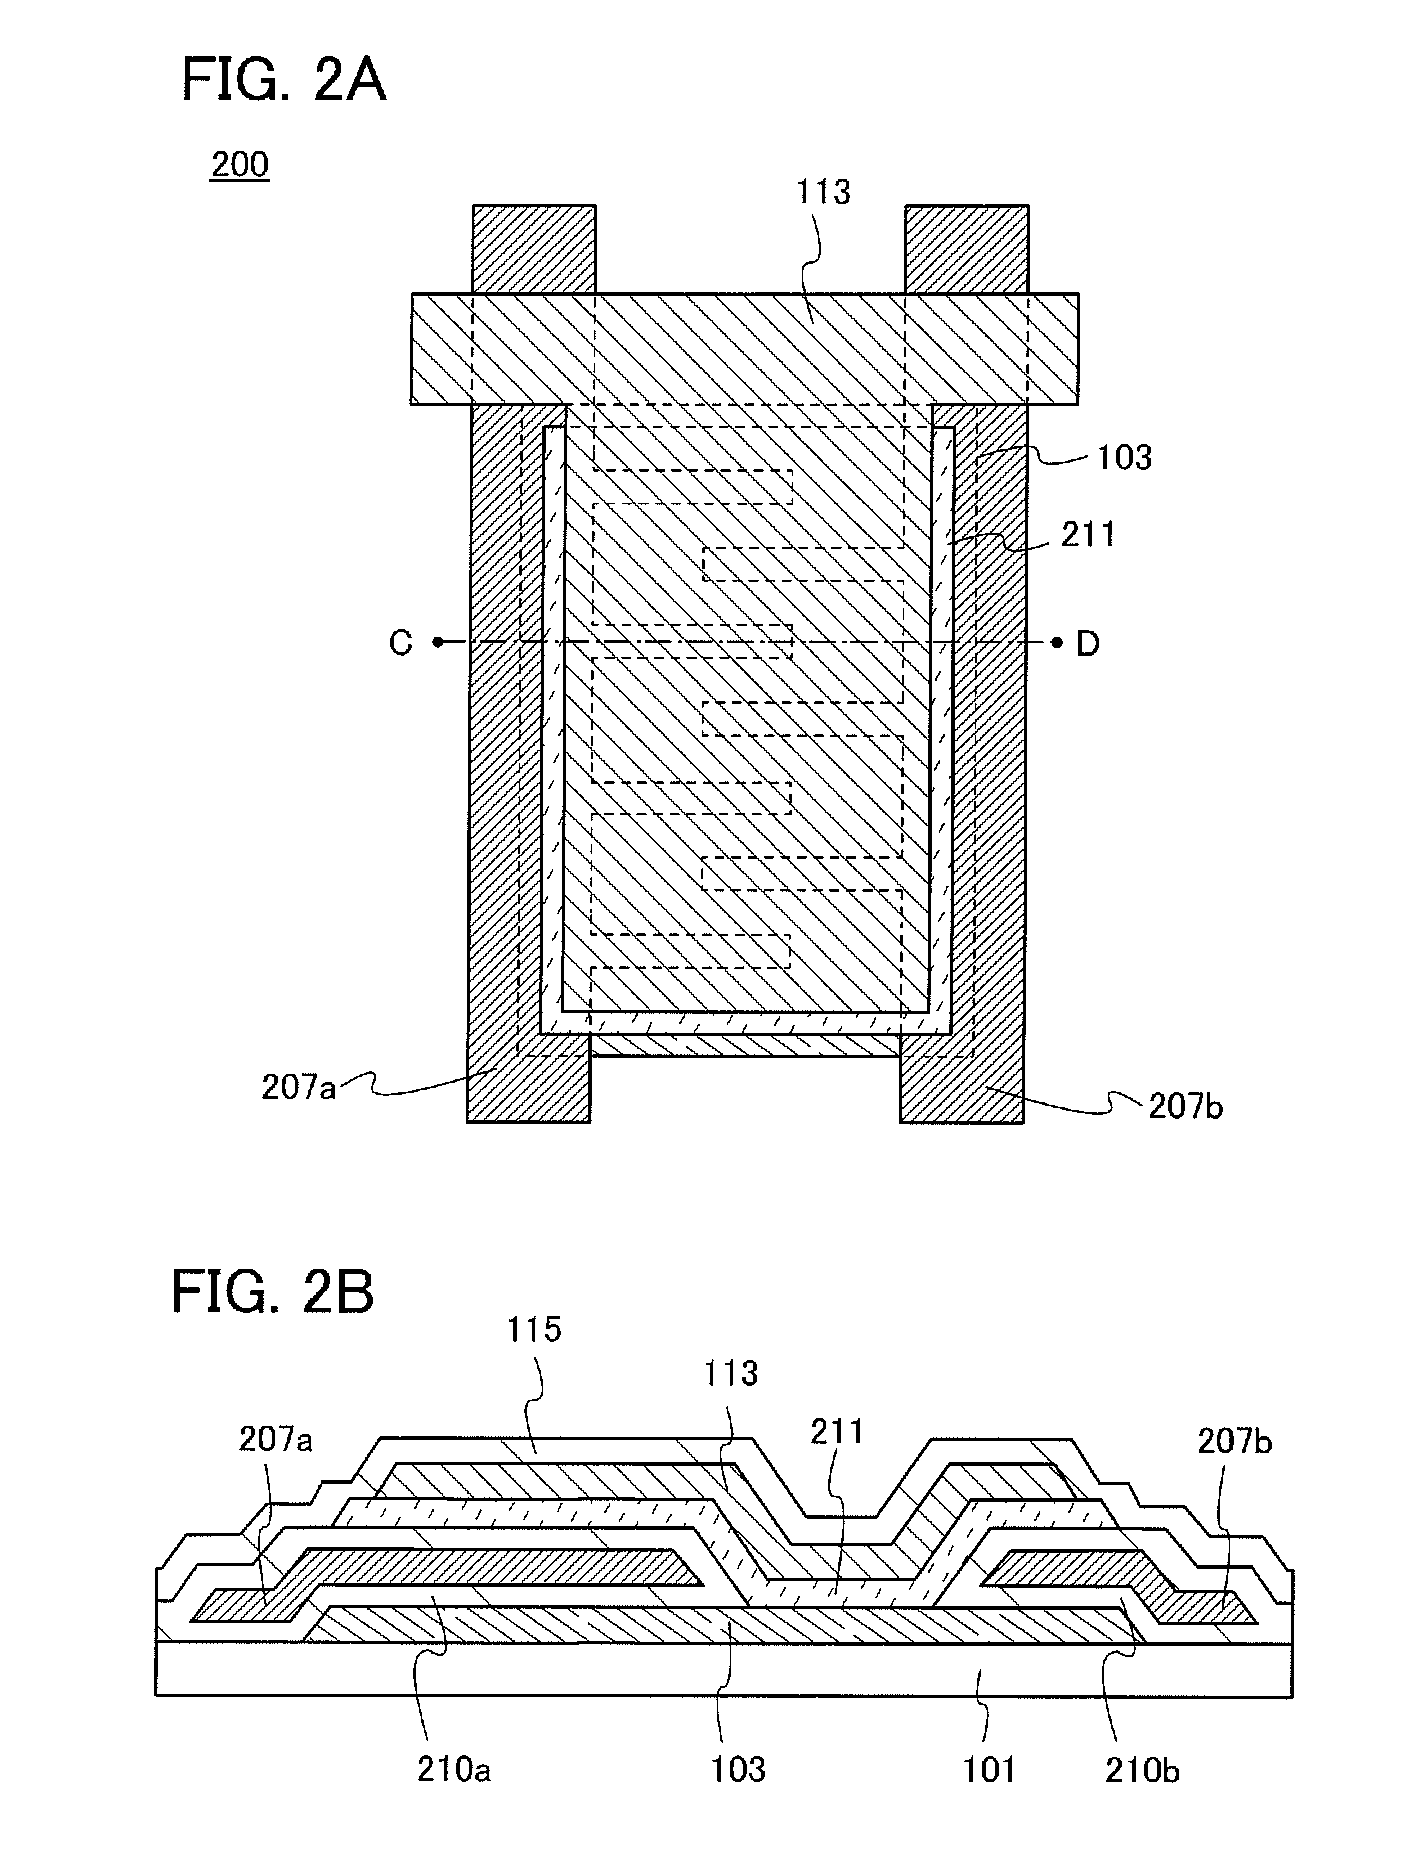 Transistor with an oxide semiconductor layer